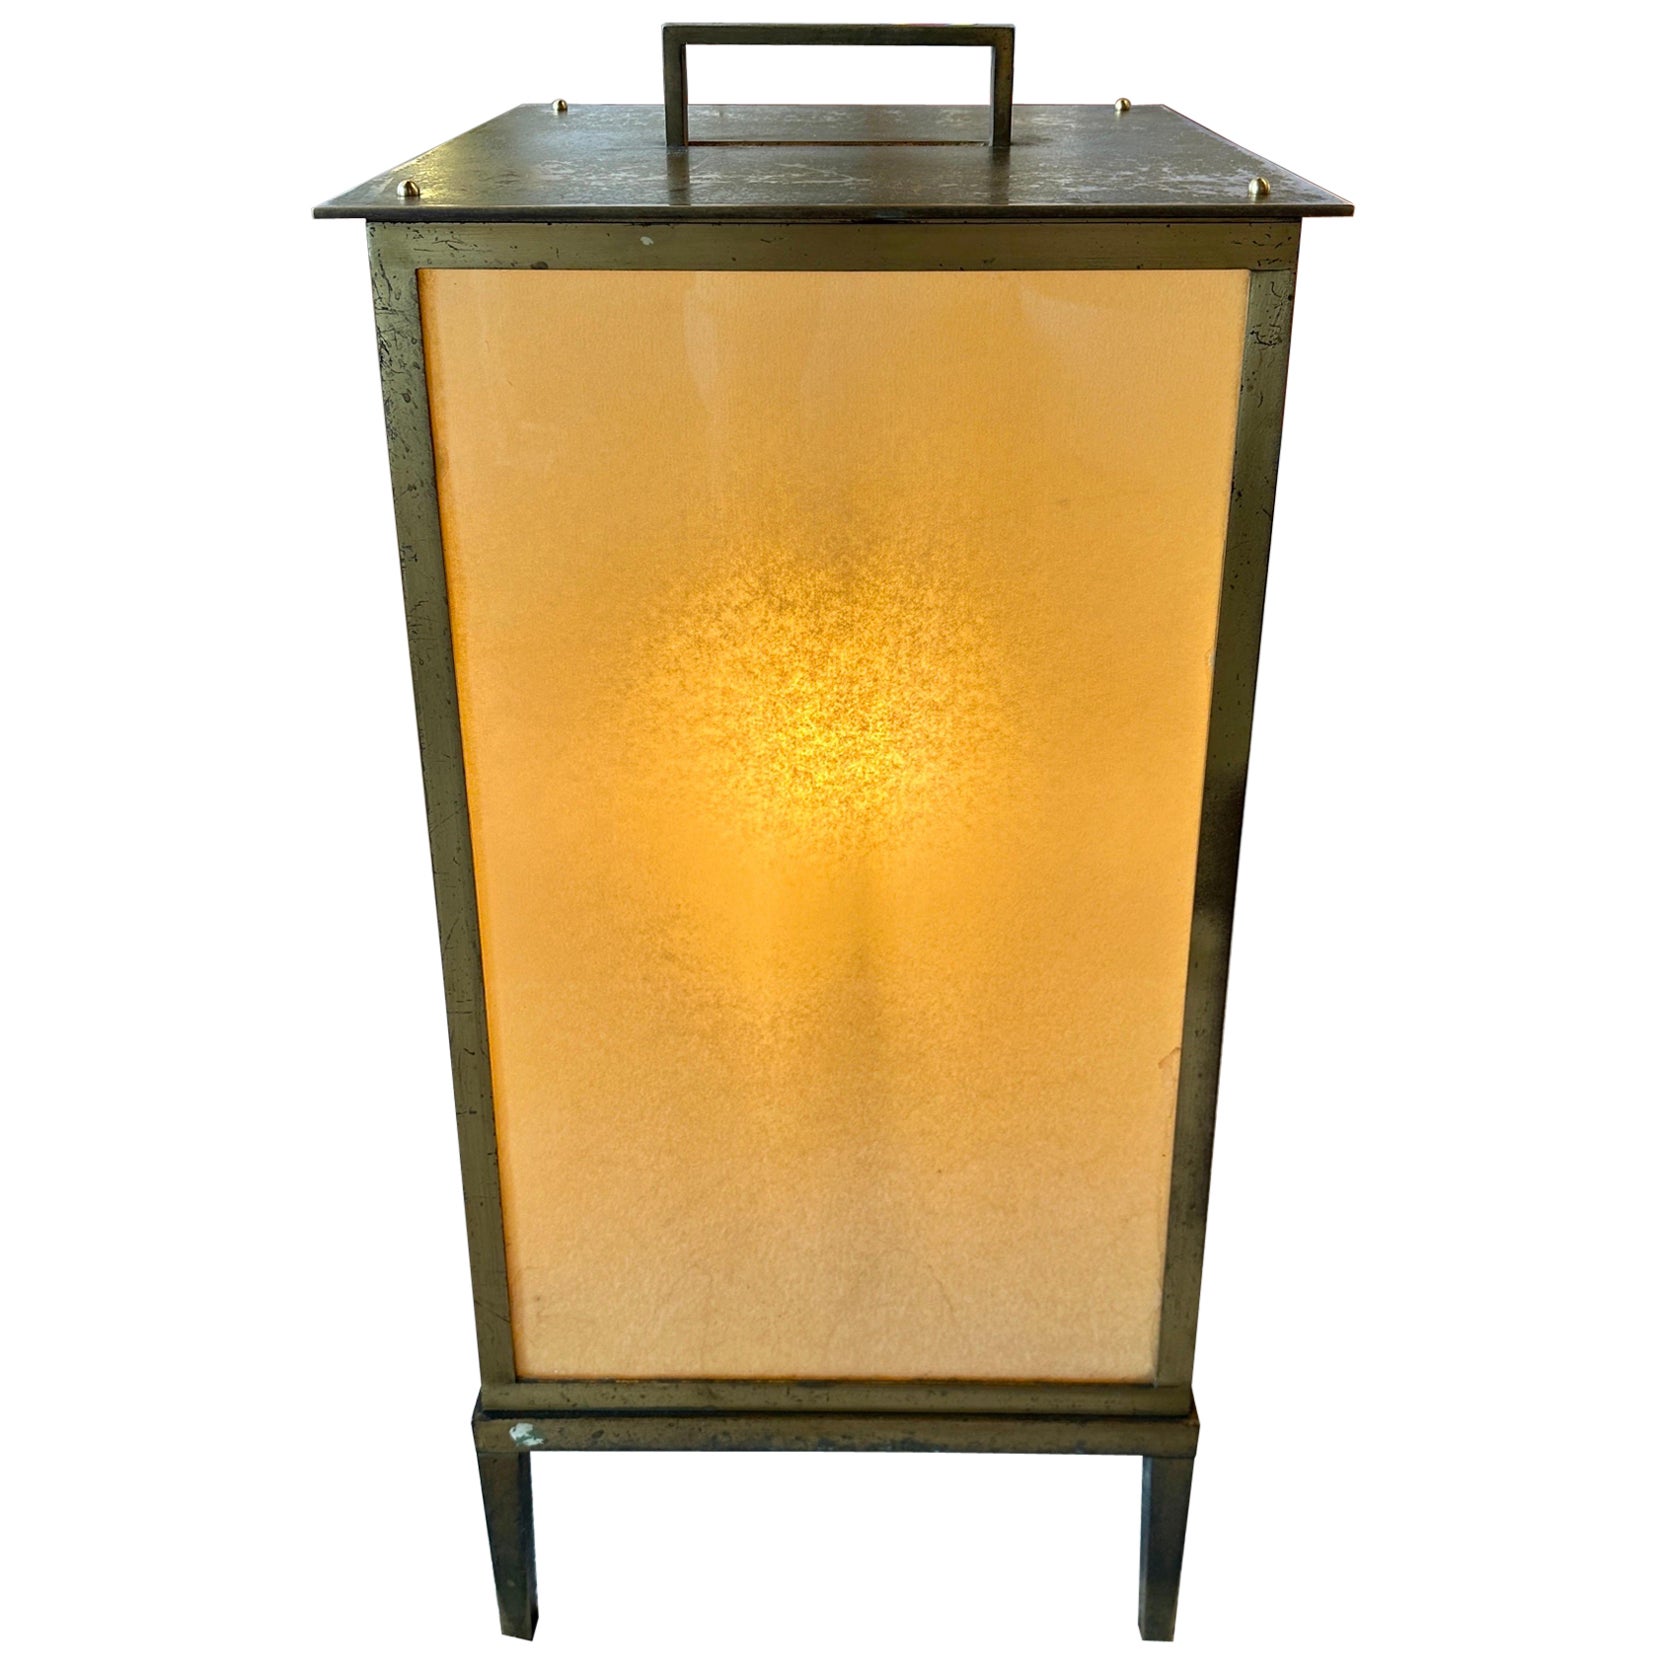 Original Christian Liaigre Bronze Japanese Style Lantern from the Mercer Hotel For Sale